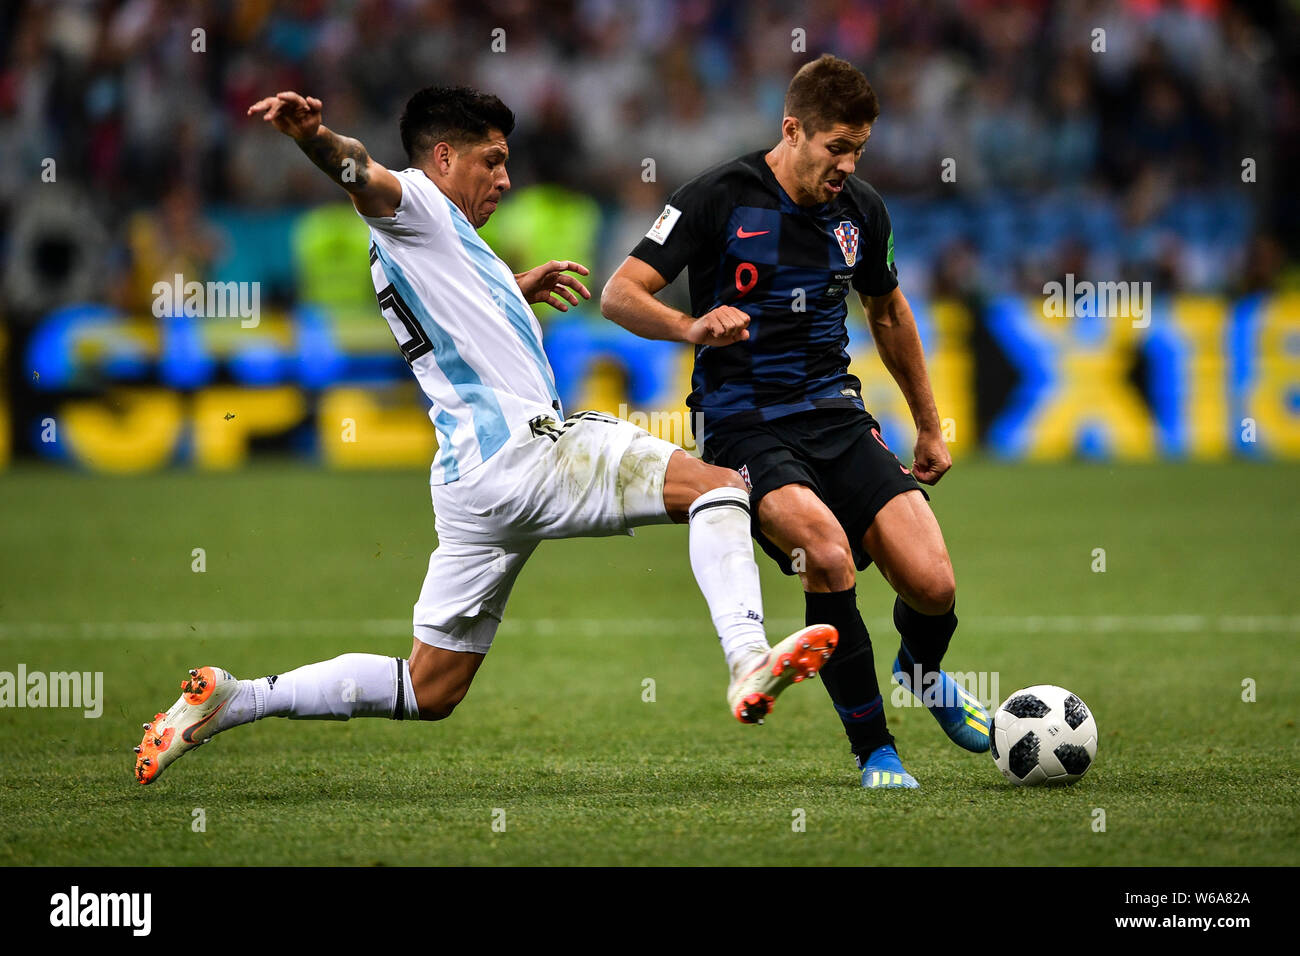 Marcos Rojo of Argentina, right, challenges Andrej Kramaric of Croatia in their Group D match during the 2018 FIFA World Cup in Nizhny Novgorod, Russi Stock Photo